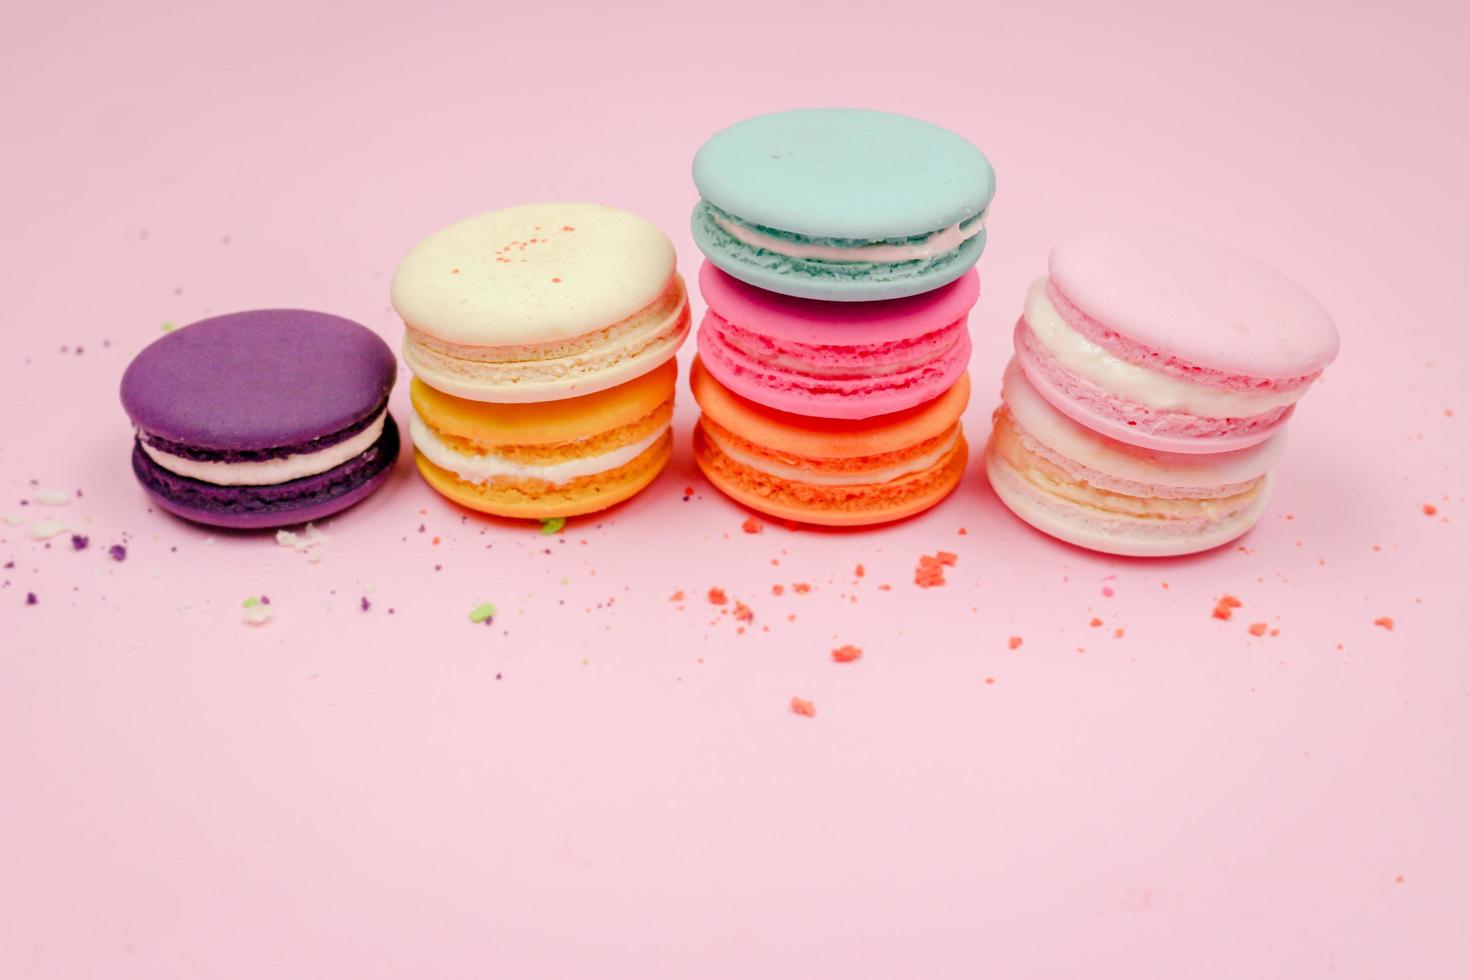 Colorful french macarons macaroons cake, delicious sweet dessert on a ...